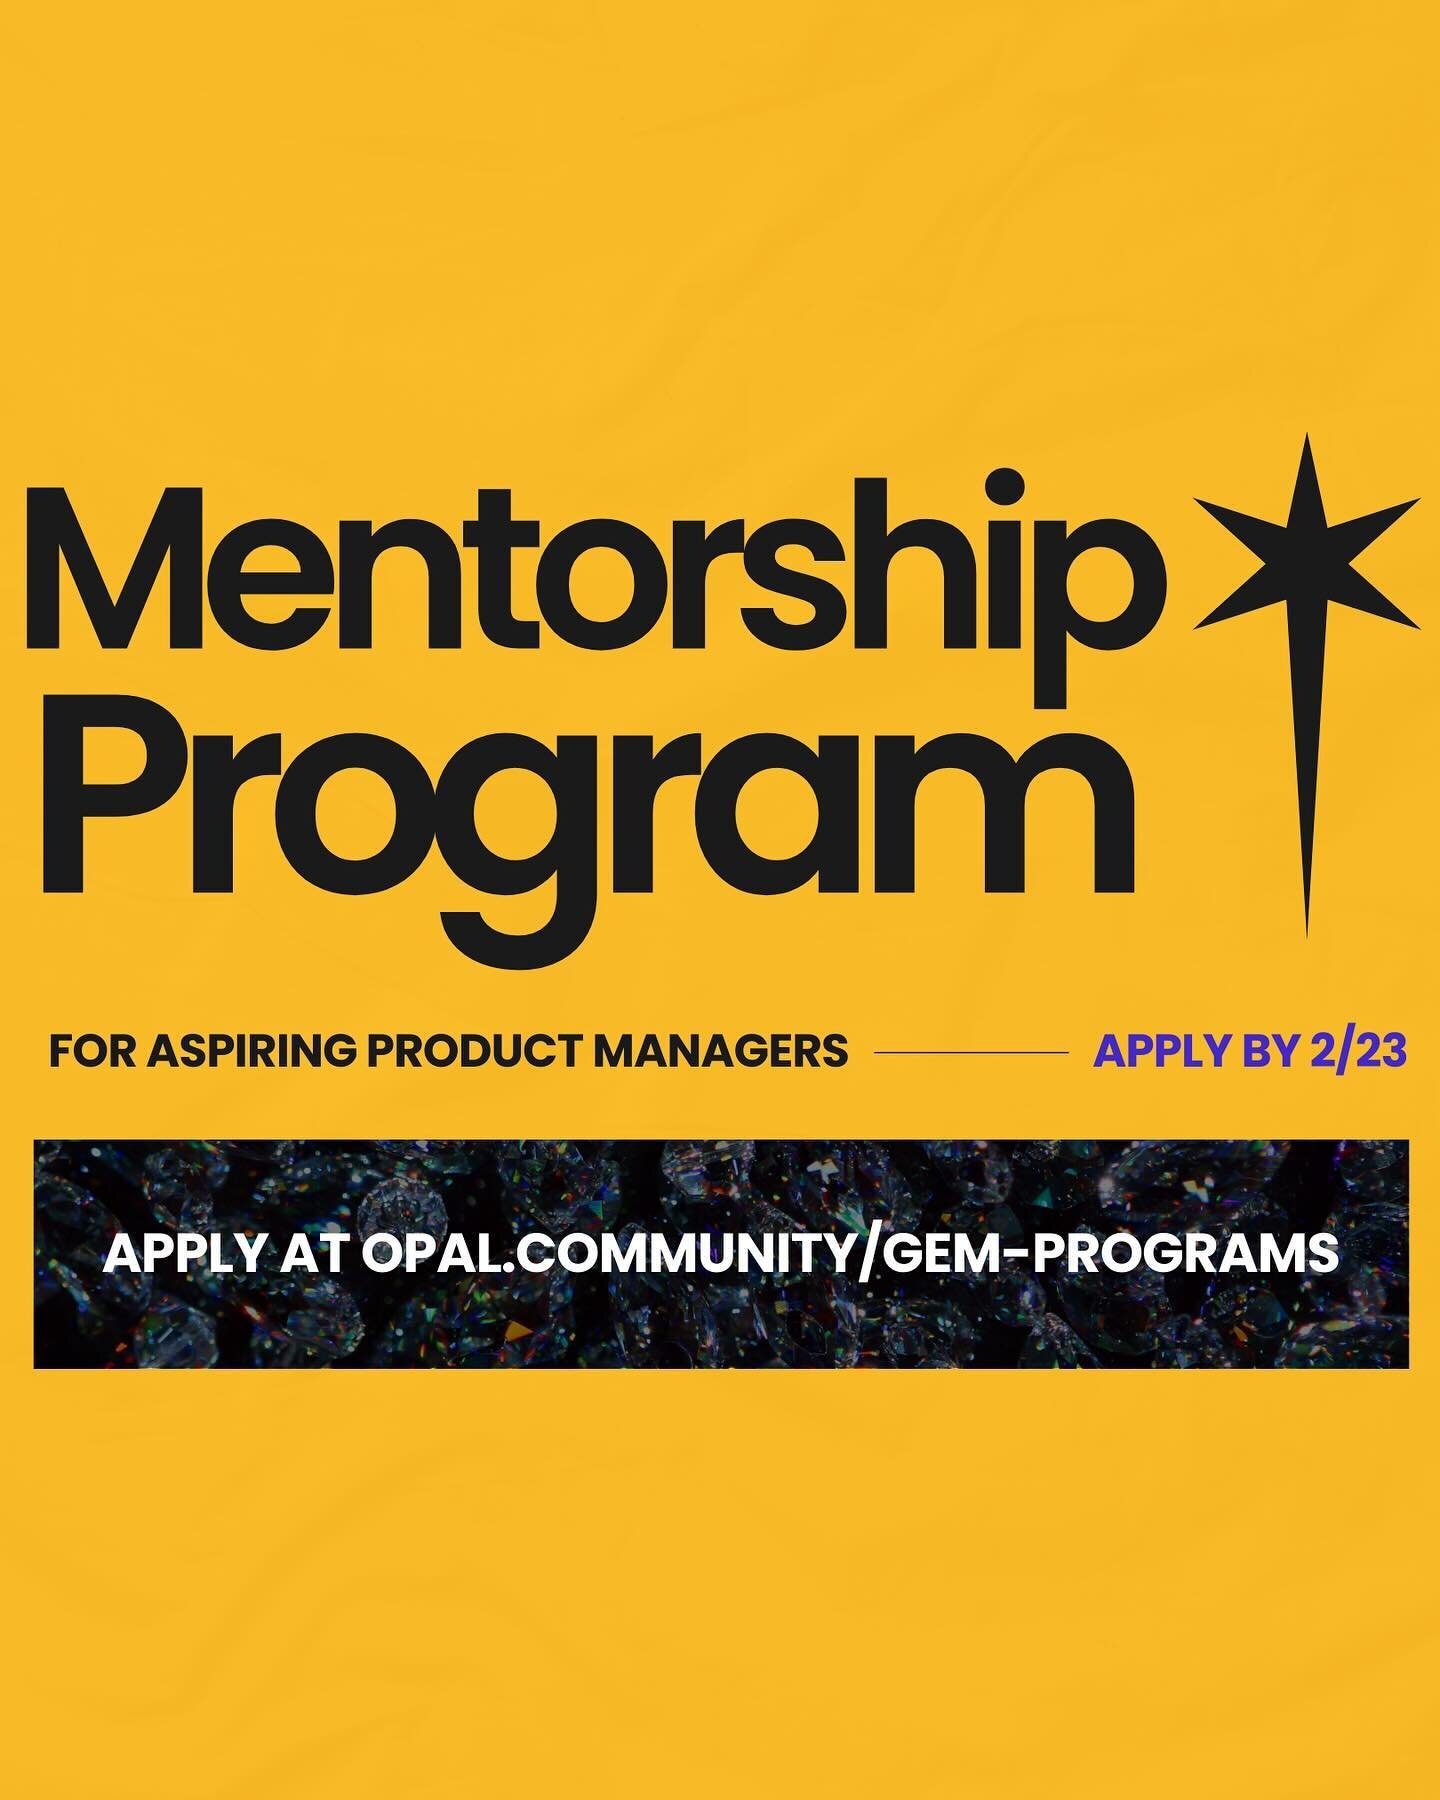 ✨PROGRAM APPLICATION DEADLINE EXTENDED ✨

THANK YOU to everyone who&rsquo;s applied so far to our GEM Program for aspiring product managers! 🤩&nbsp;We&rsquo;ll be reaching out to you shortly. 

For anyone else interested in joining, it&rsquo;s not t